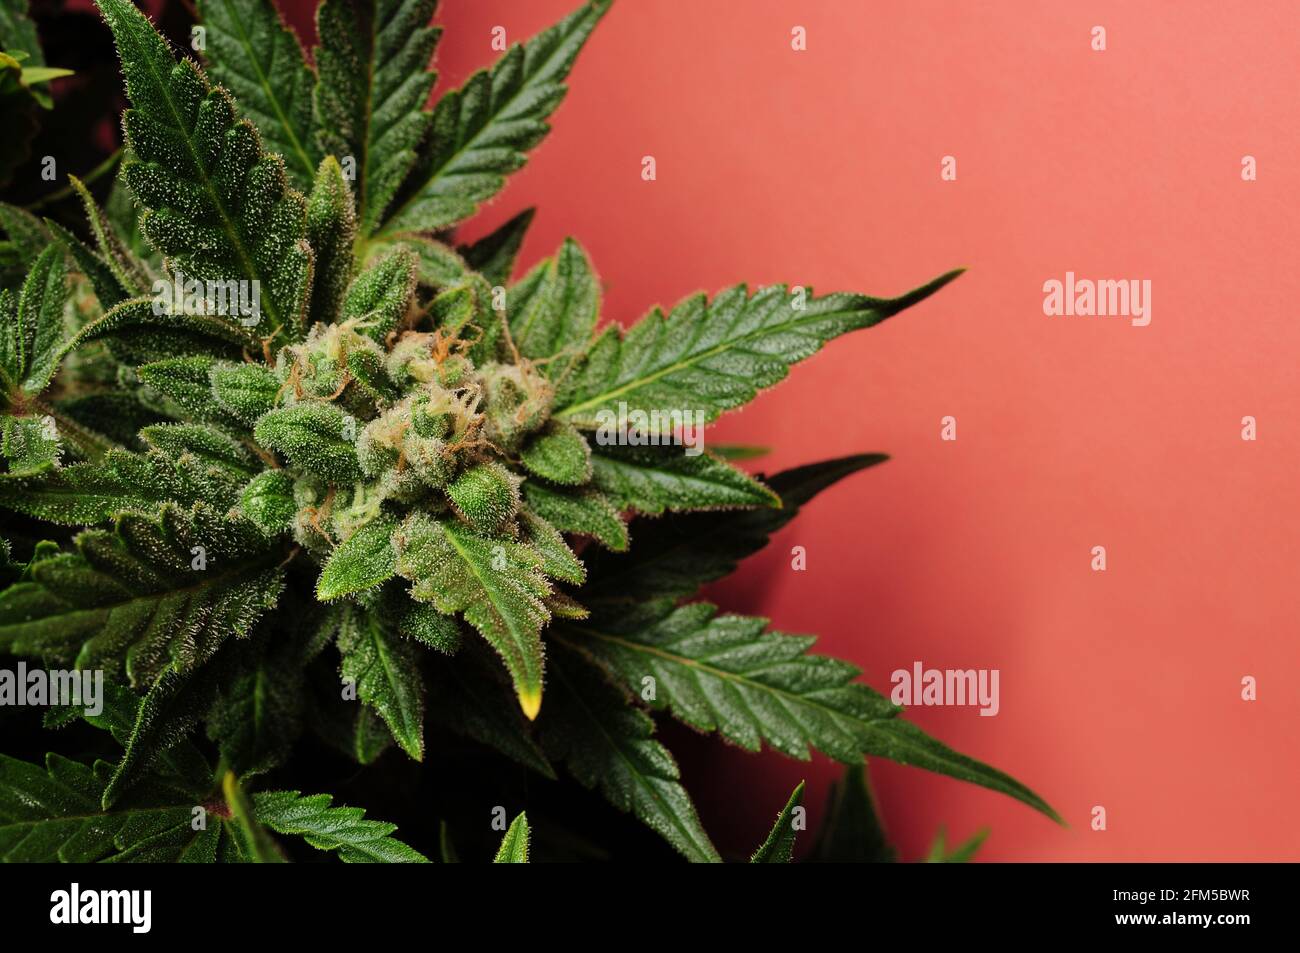 Blooming cannabis bush. Fresh plant isolated on red background. Green marijuana leaves. Herbal medicine layout. Hemp recreation, legalization concept. Stock Photo